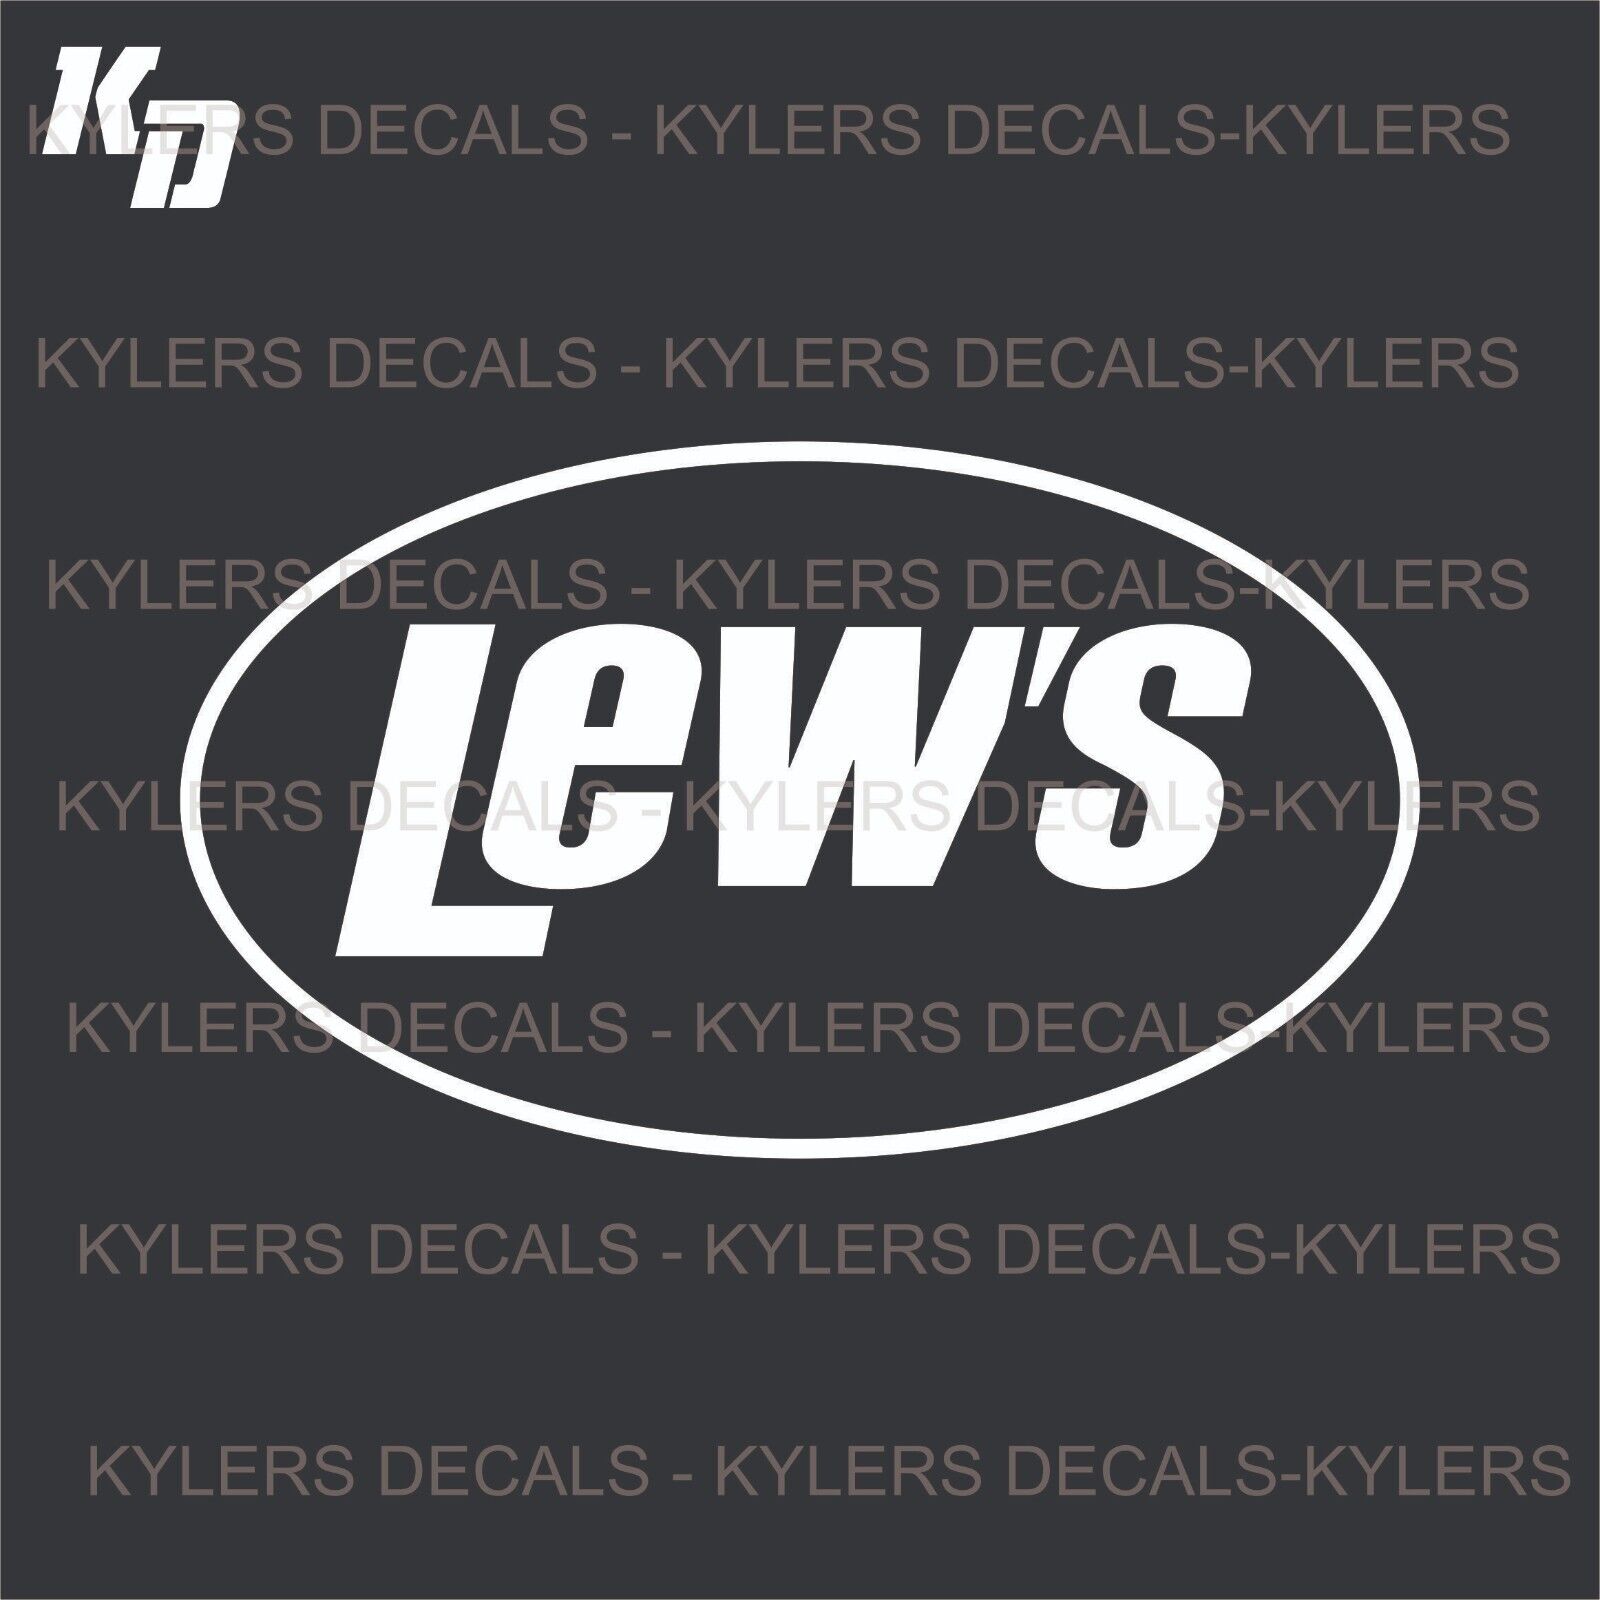 LEWS FISHING VINYL DECALS LOGO OUTDOORS NEW FREE SHIPPING 7.25X12.5